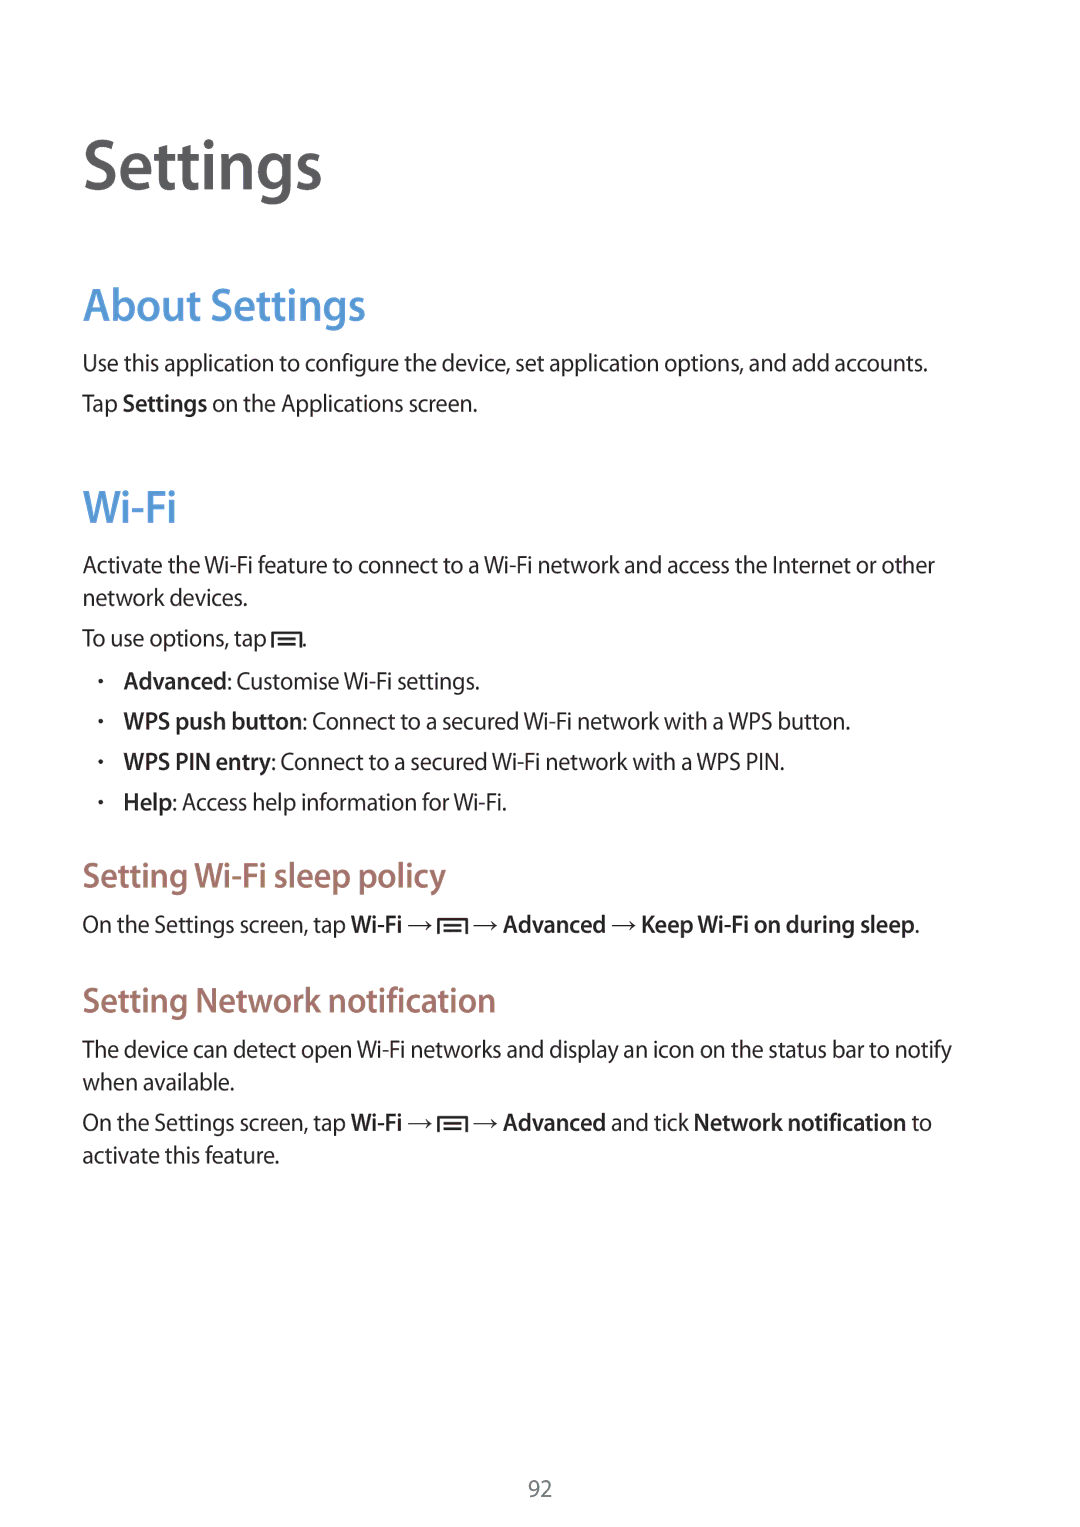 Samsung SM-T310 user manual About Settings, Setting Wi-Fi sleep policy, Setting Network notification 